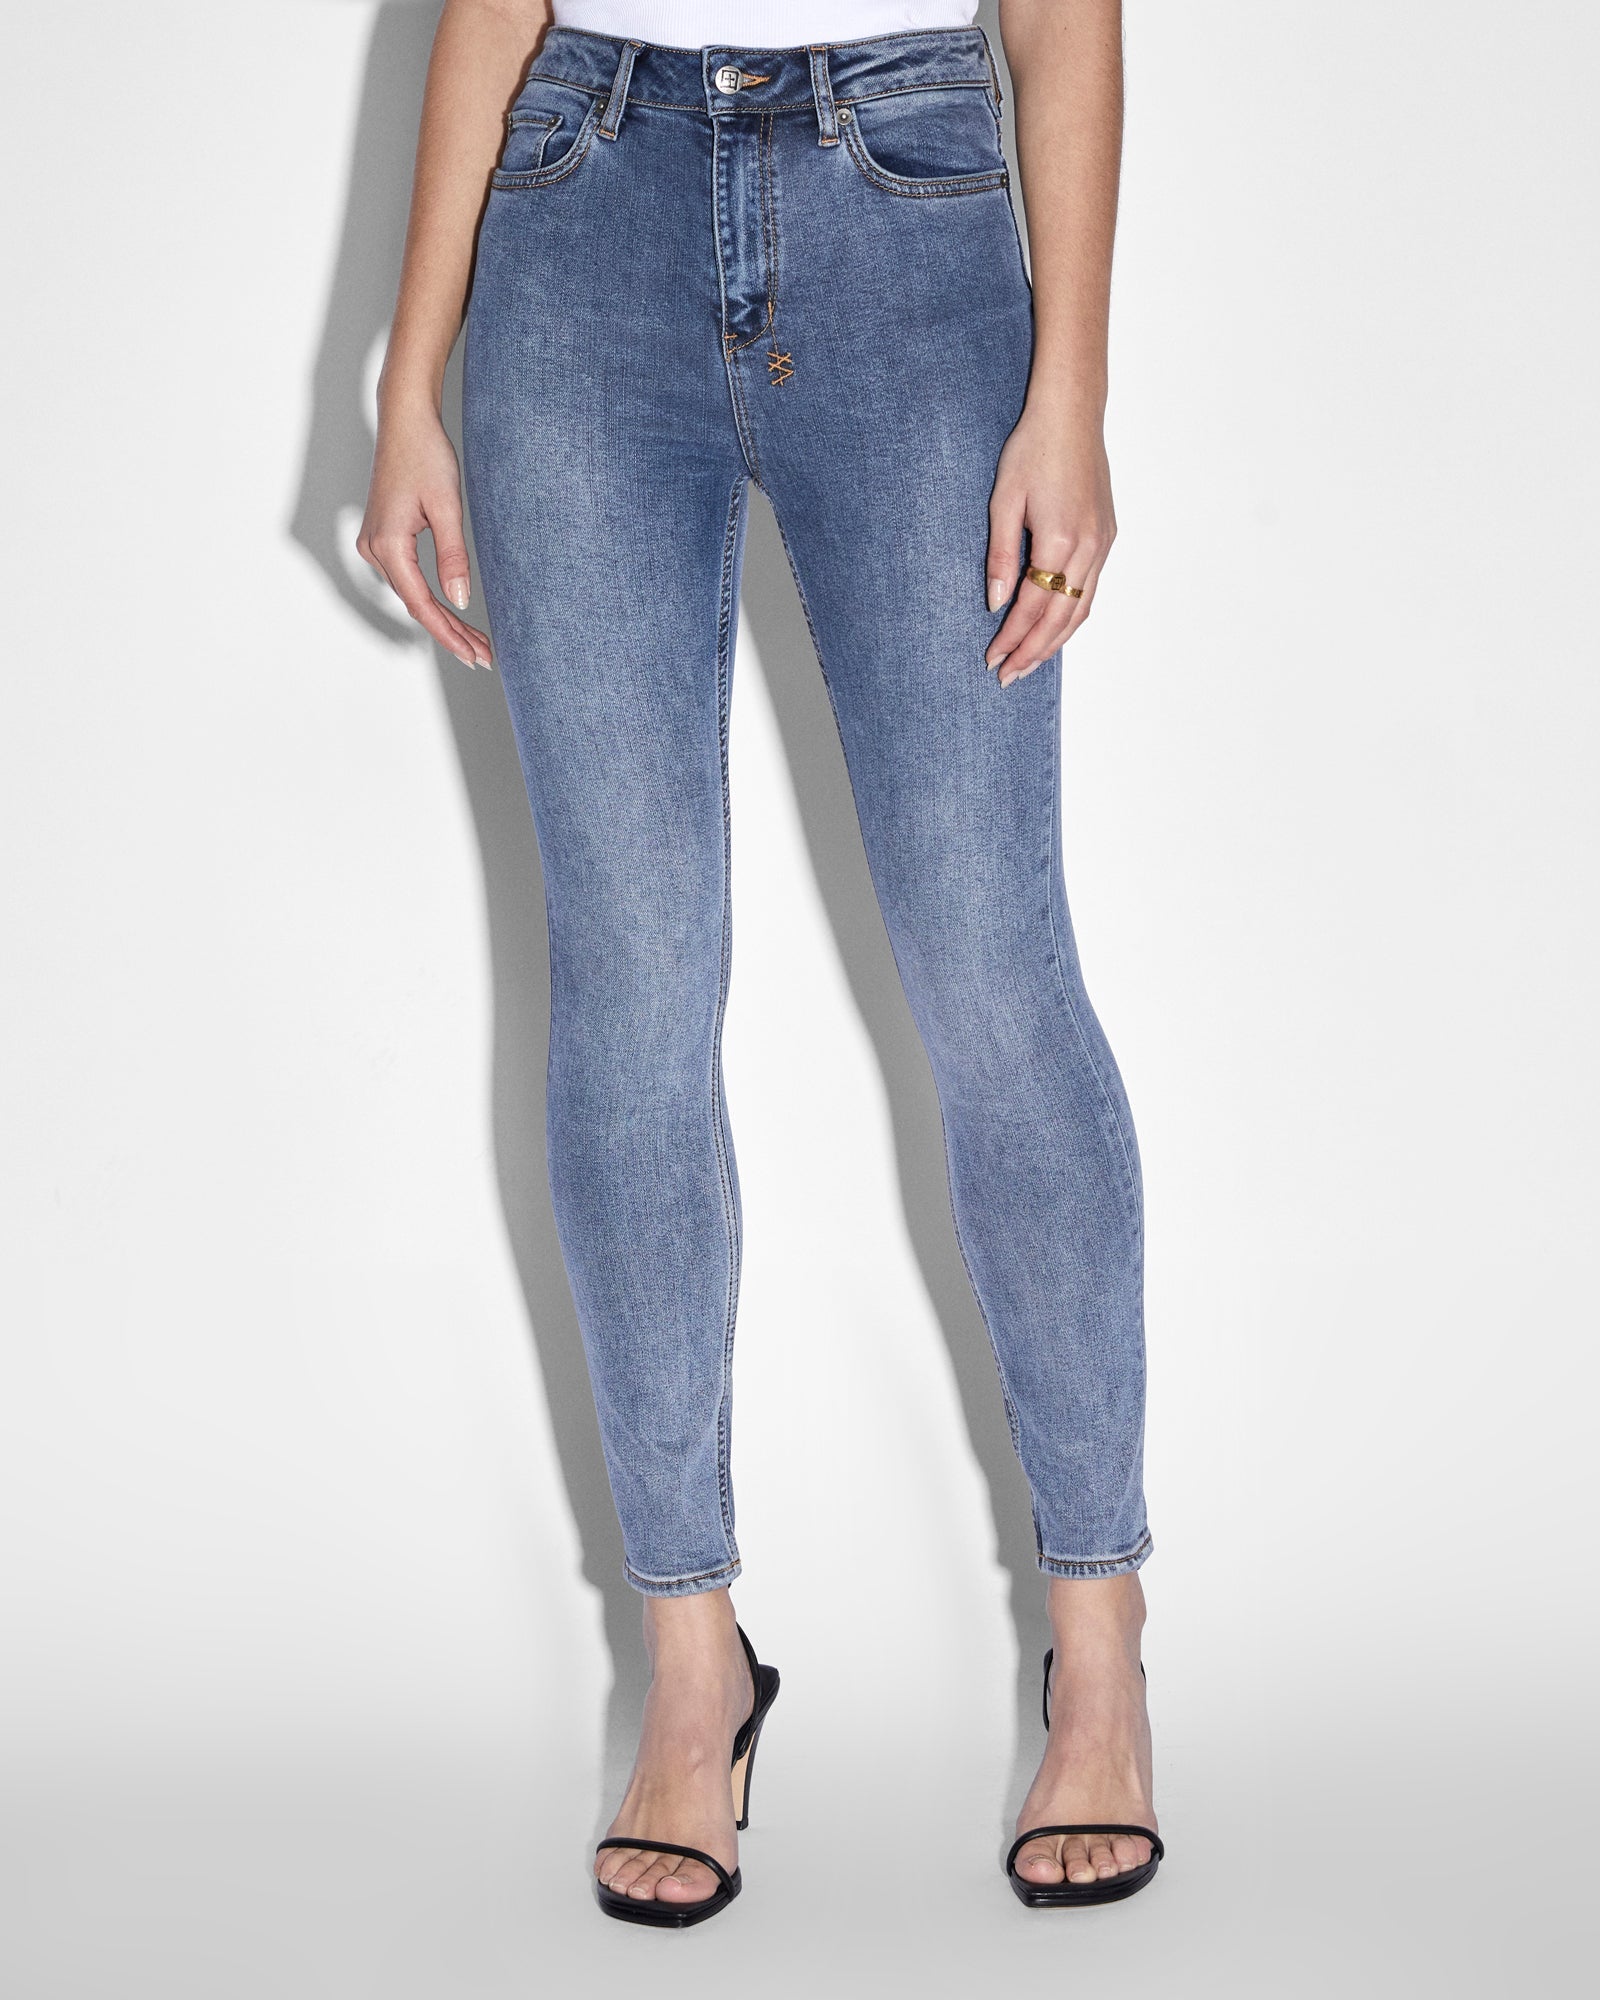 Skinny Jeans & Tight Jeans For Women